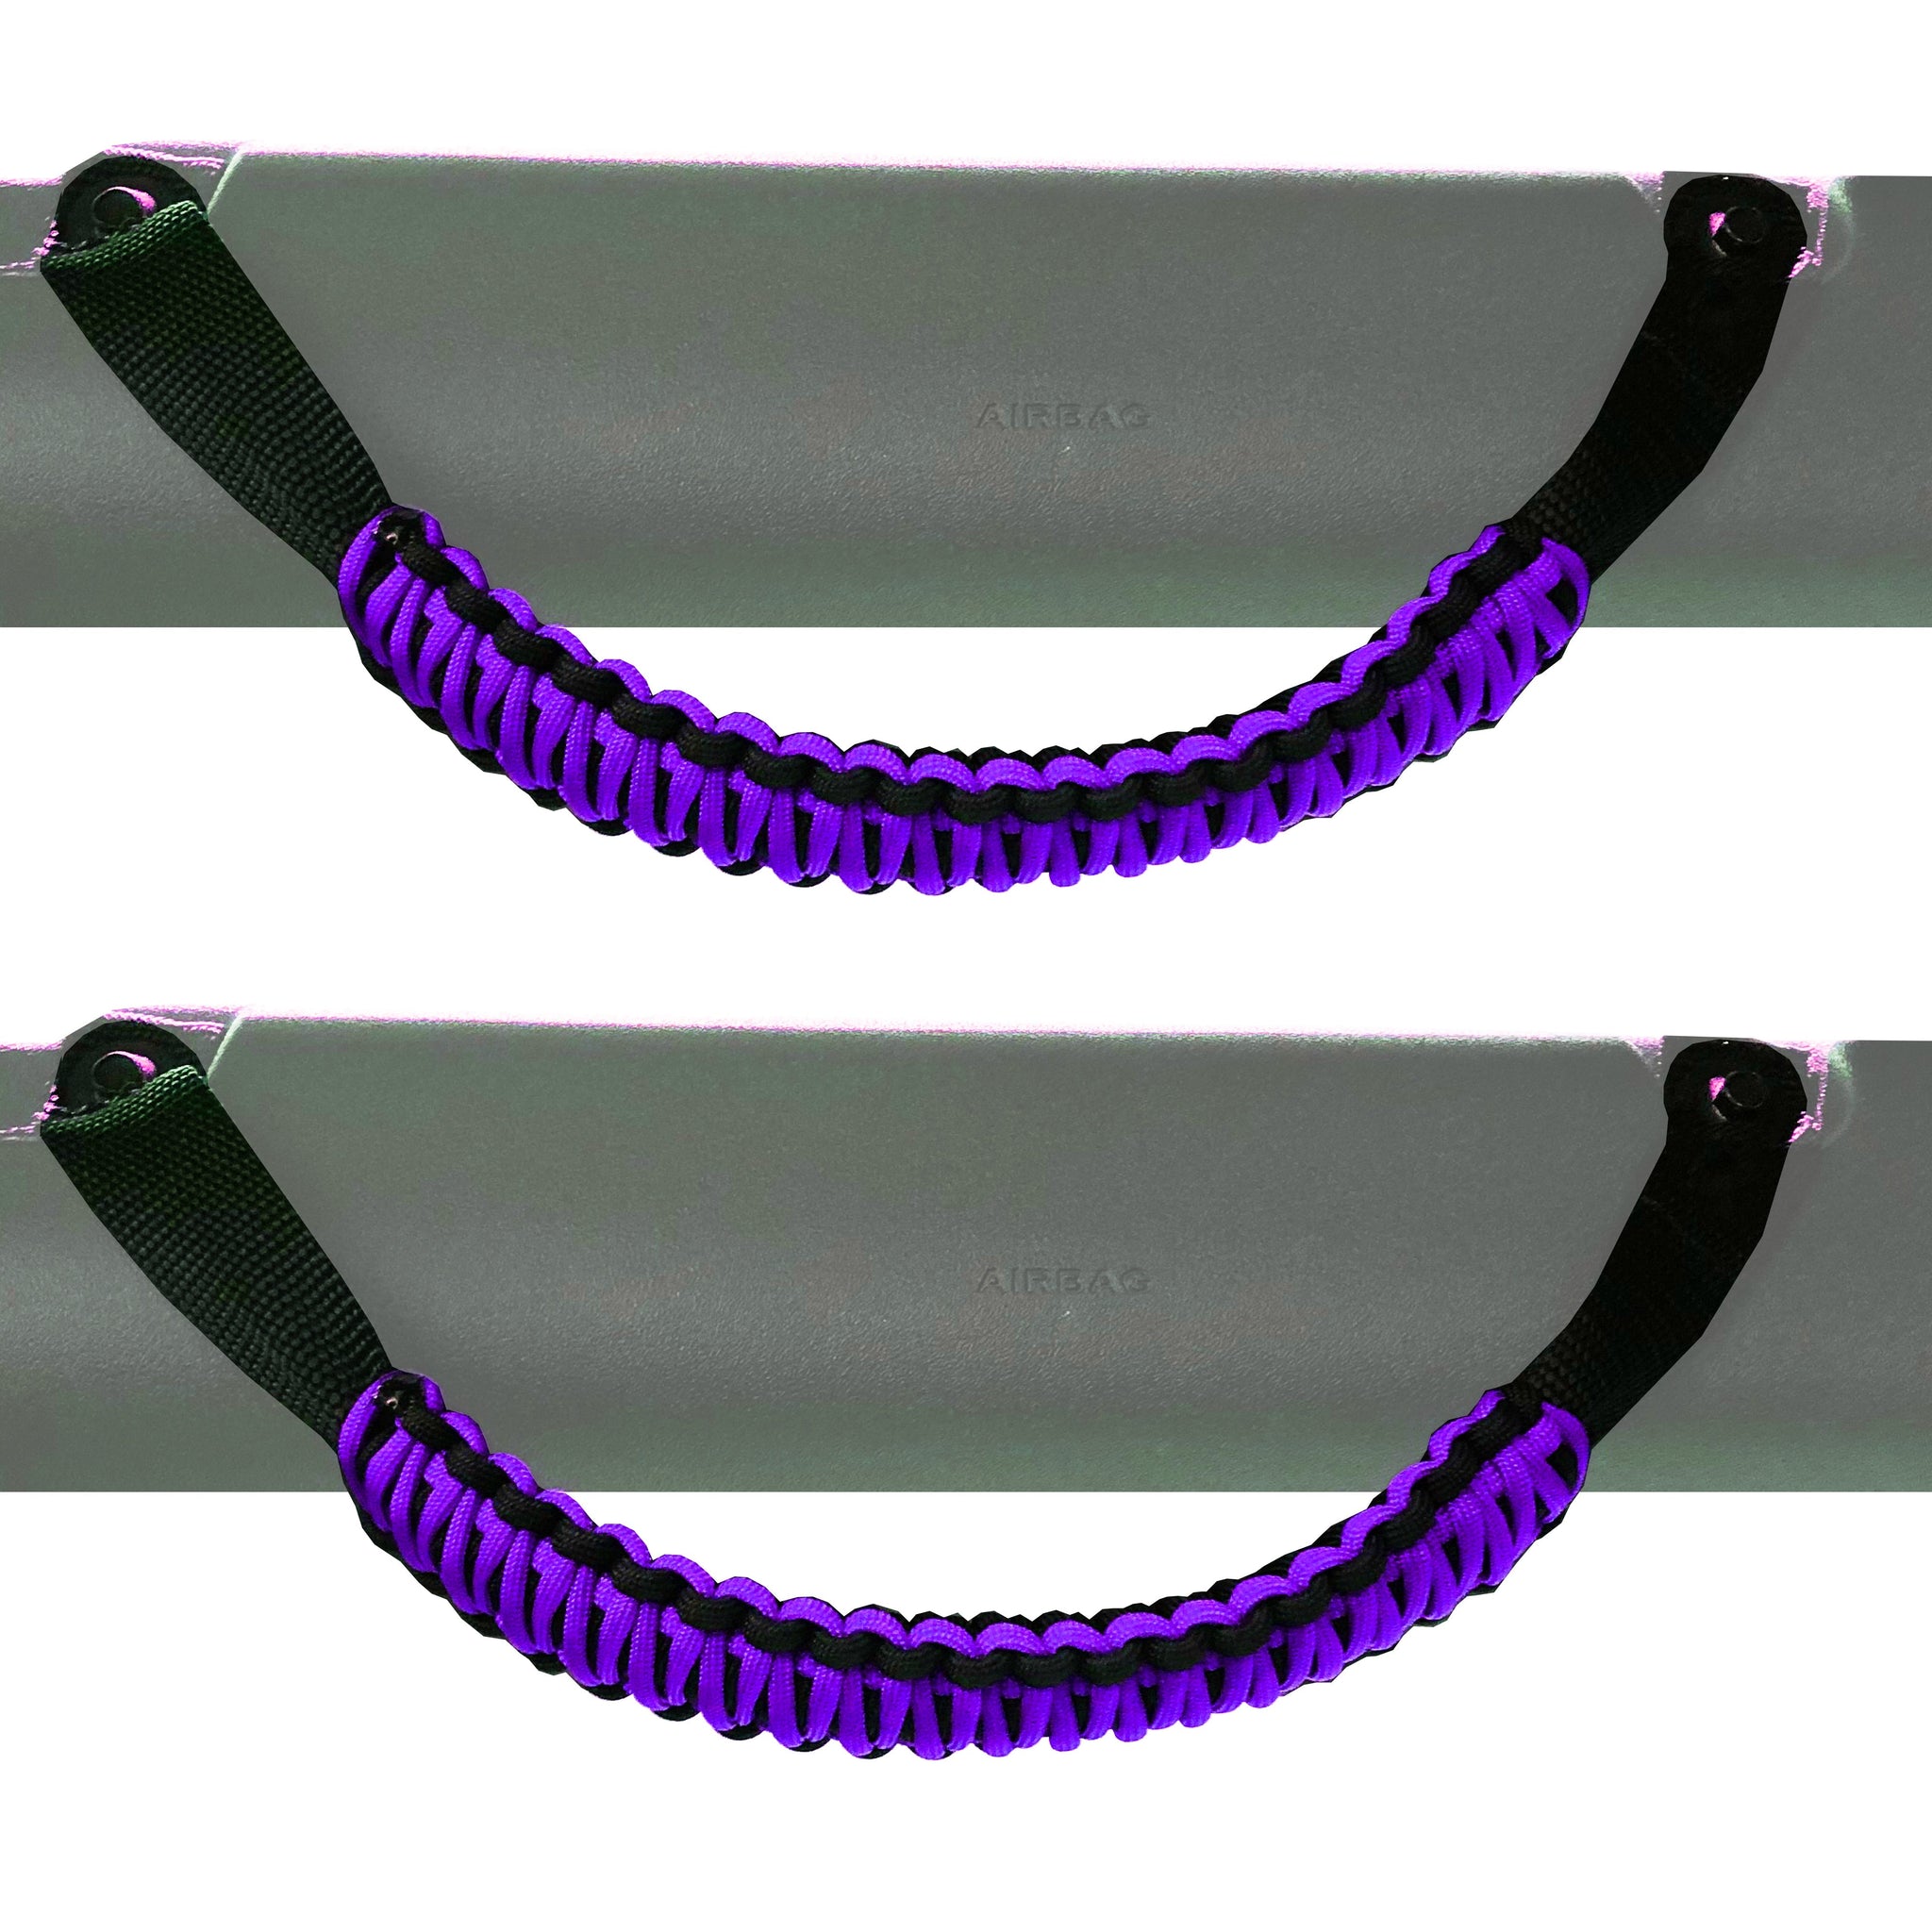 Bronco Paracord Grab Handles Custom for Ford Bronco Full-Size 2021 2022  2023 2024 (Pair of 2) Bartact